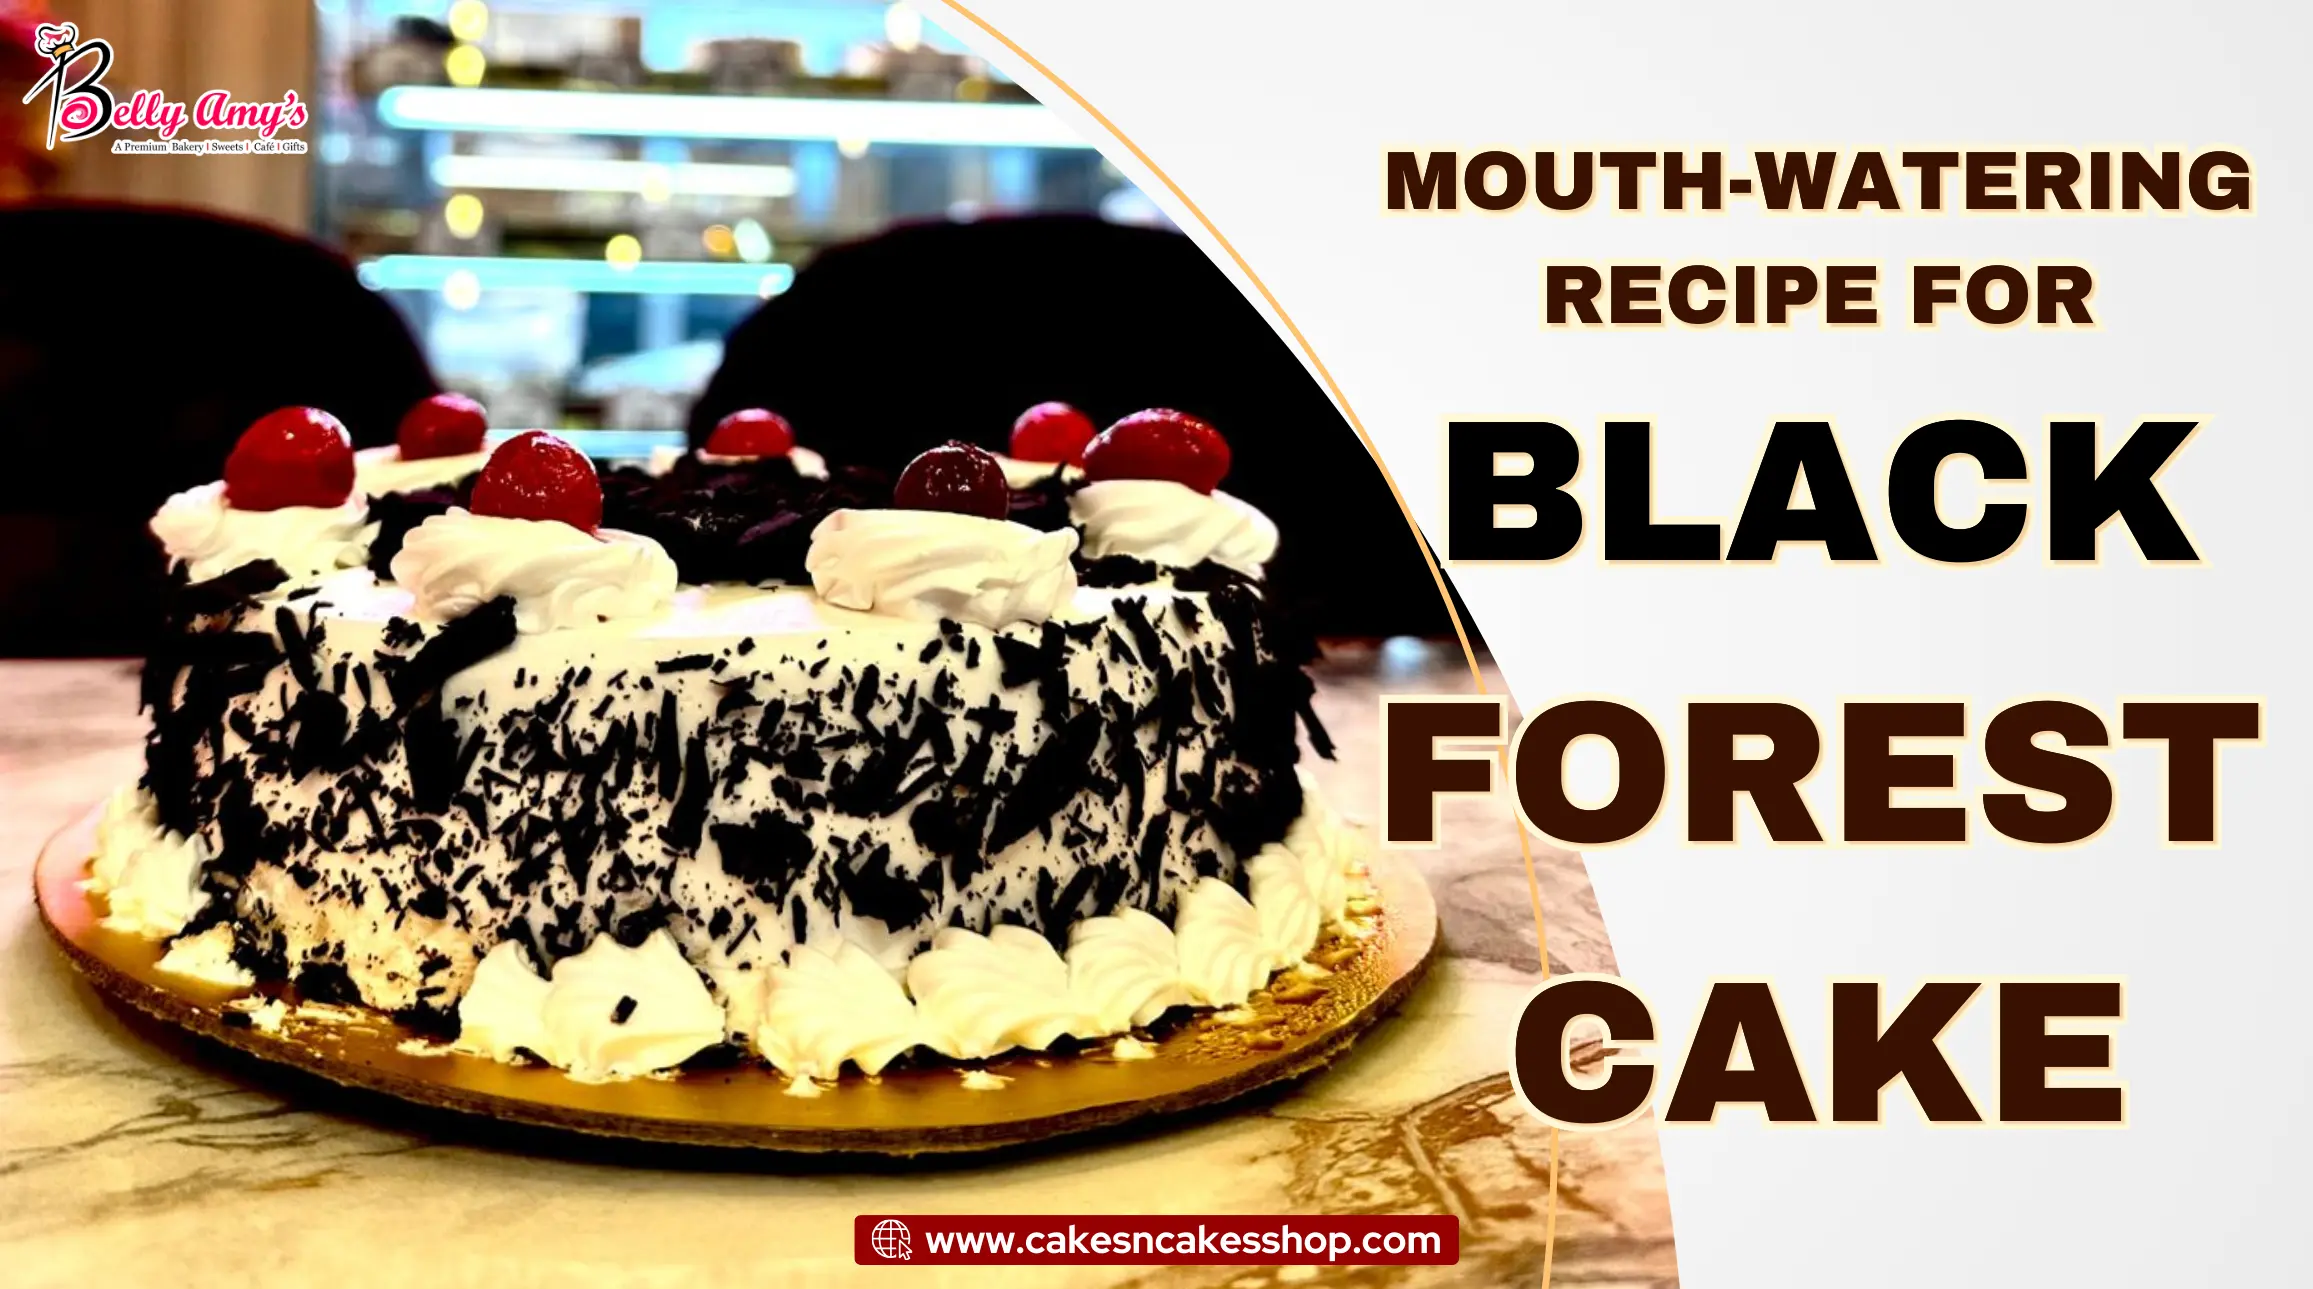 Mouth-Watering Recipe for Black Forest Cake